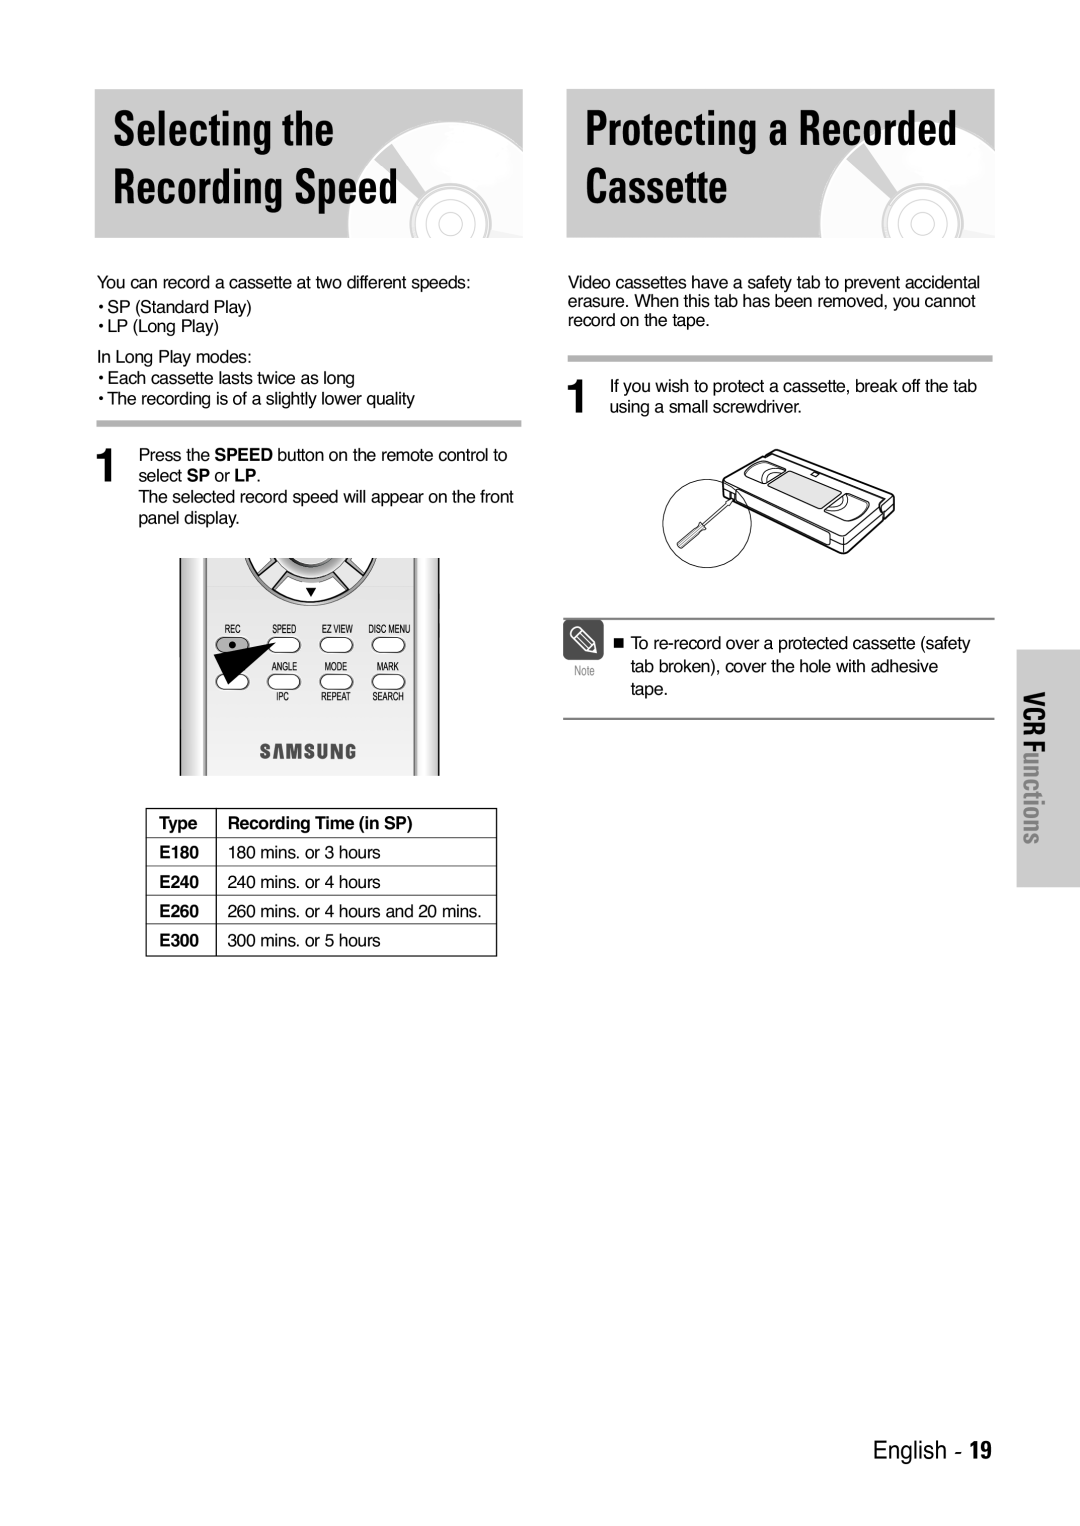 Samsung V6500K, V7000K user manual Selecting the Recording Speed, Cassette, Protecting a Recorded, VCR Functions, English 